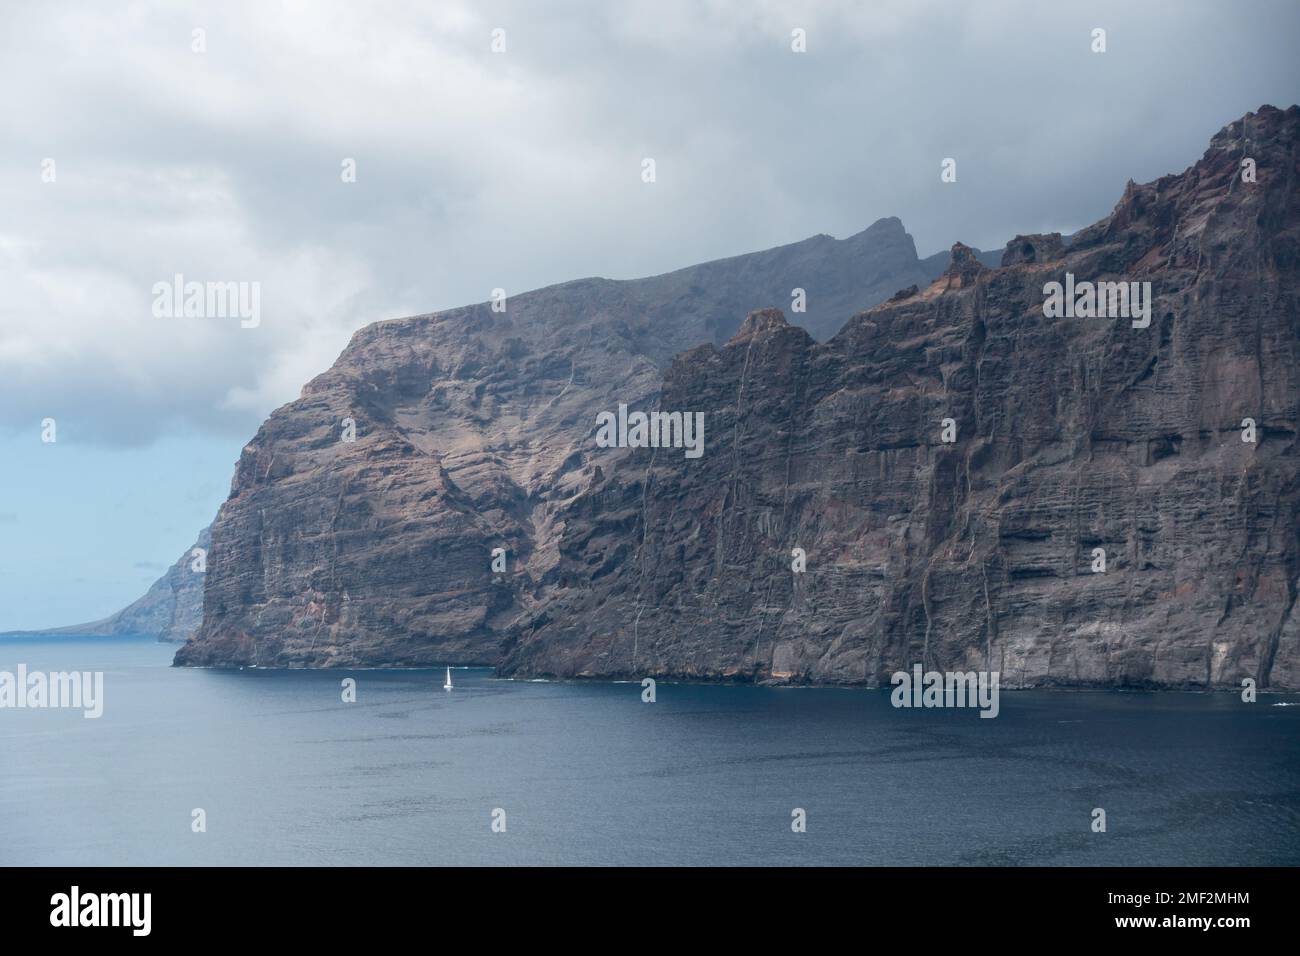 The towering Acantilados de Los Gigantes cliffs on the west coast of Tenerife, from which Los Gigantes gets its name. Stock Photo